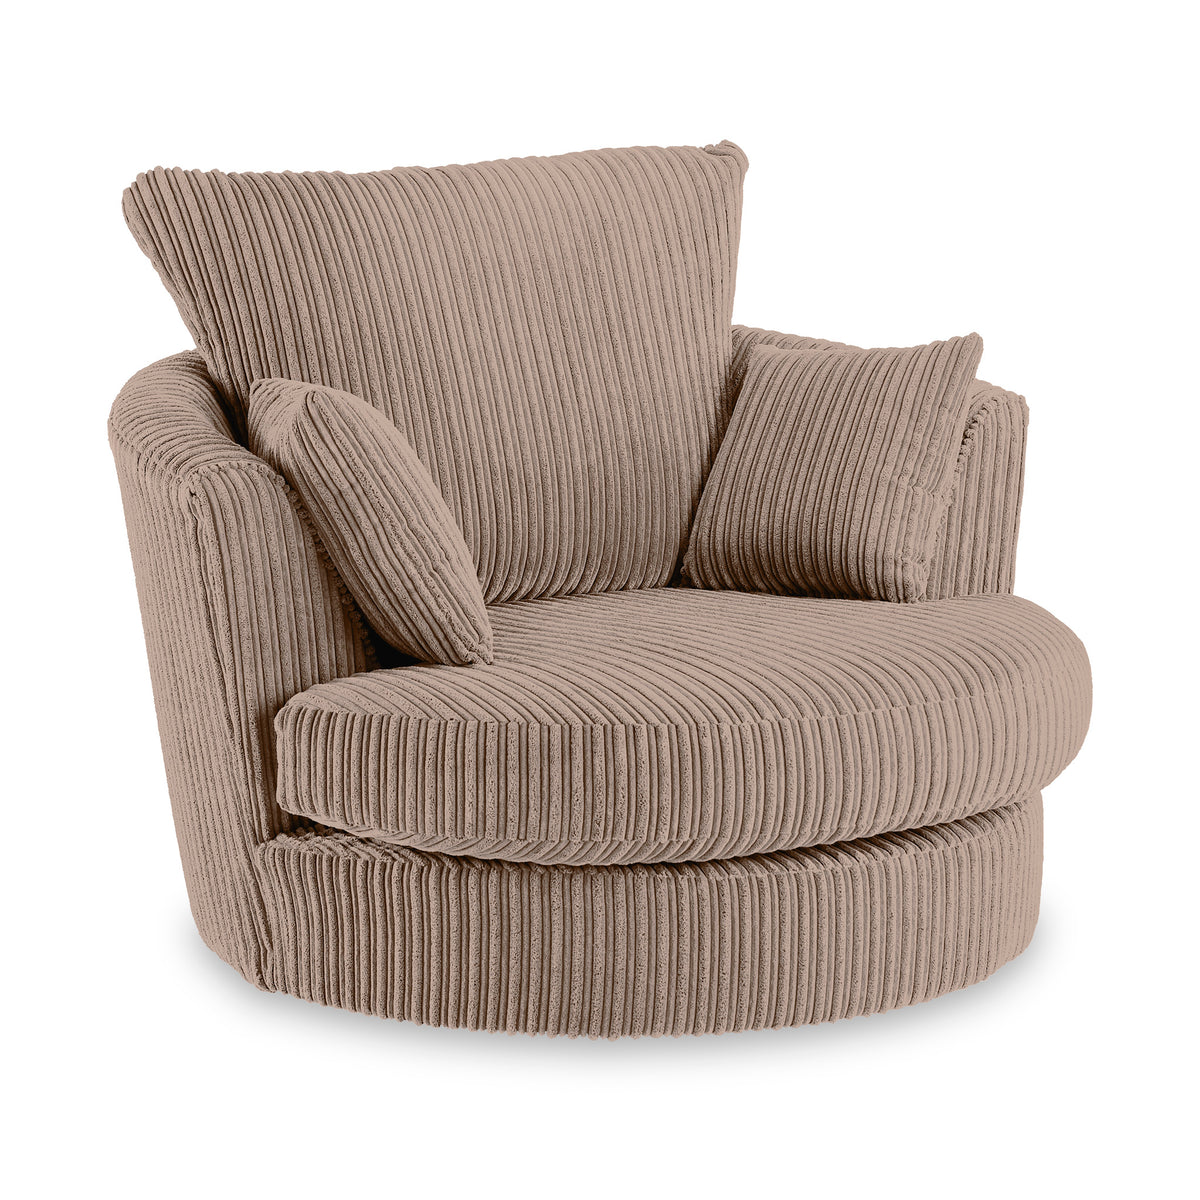 Bletchley Coffee Jumbo Cord Swivel Chair from Roseland Furniture